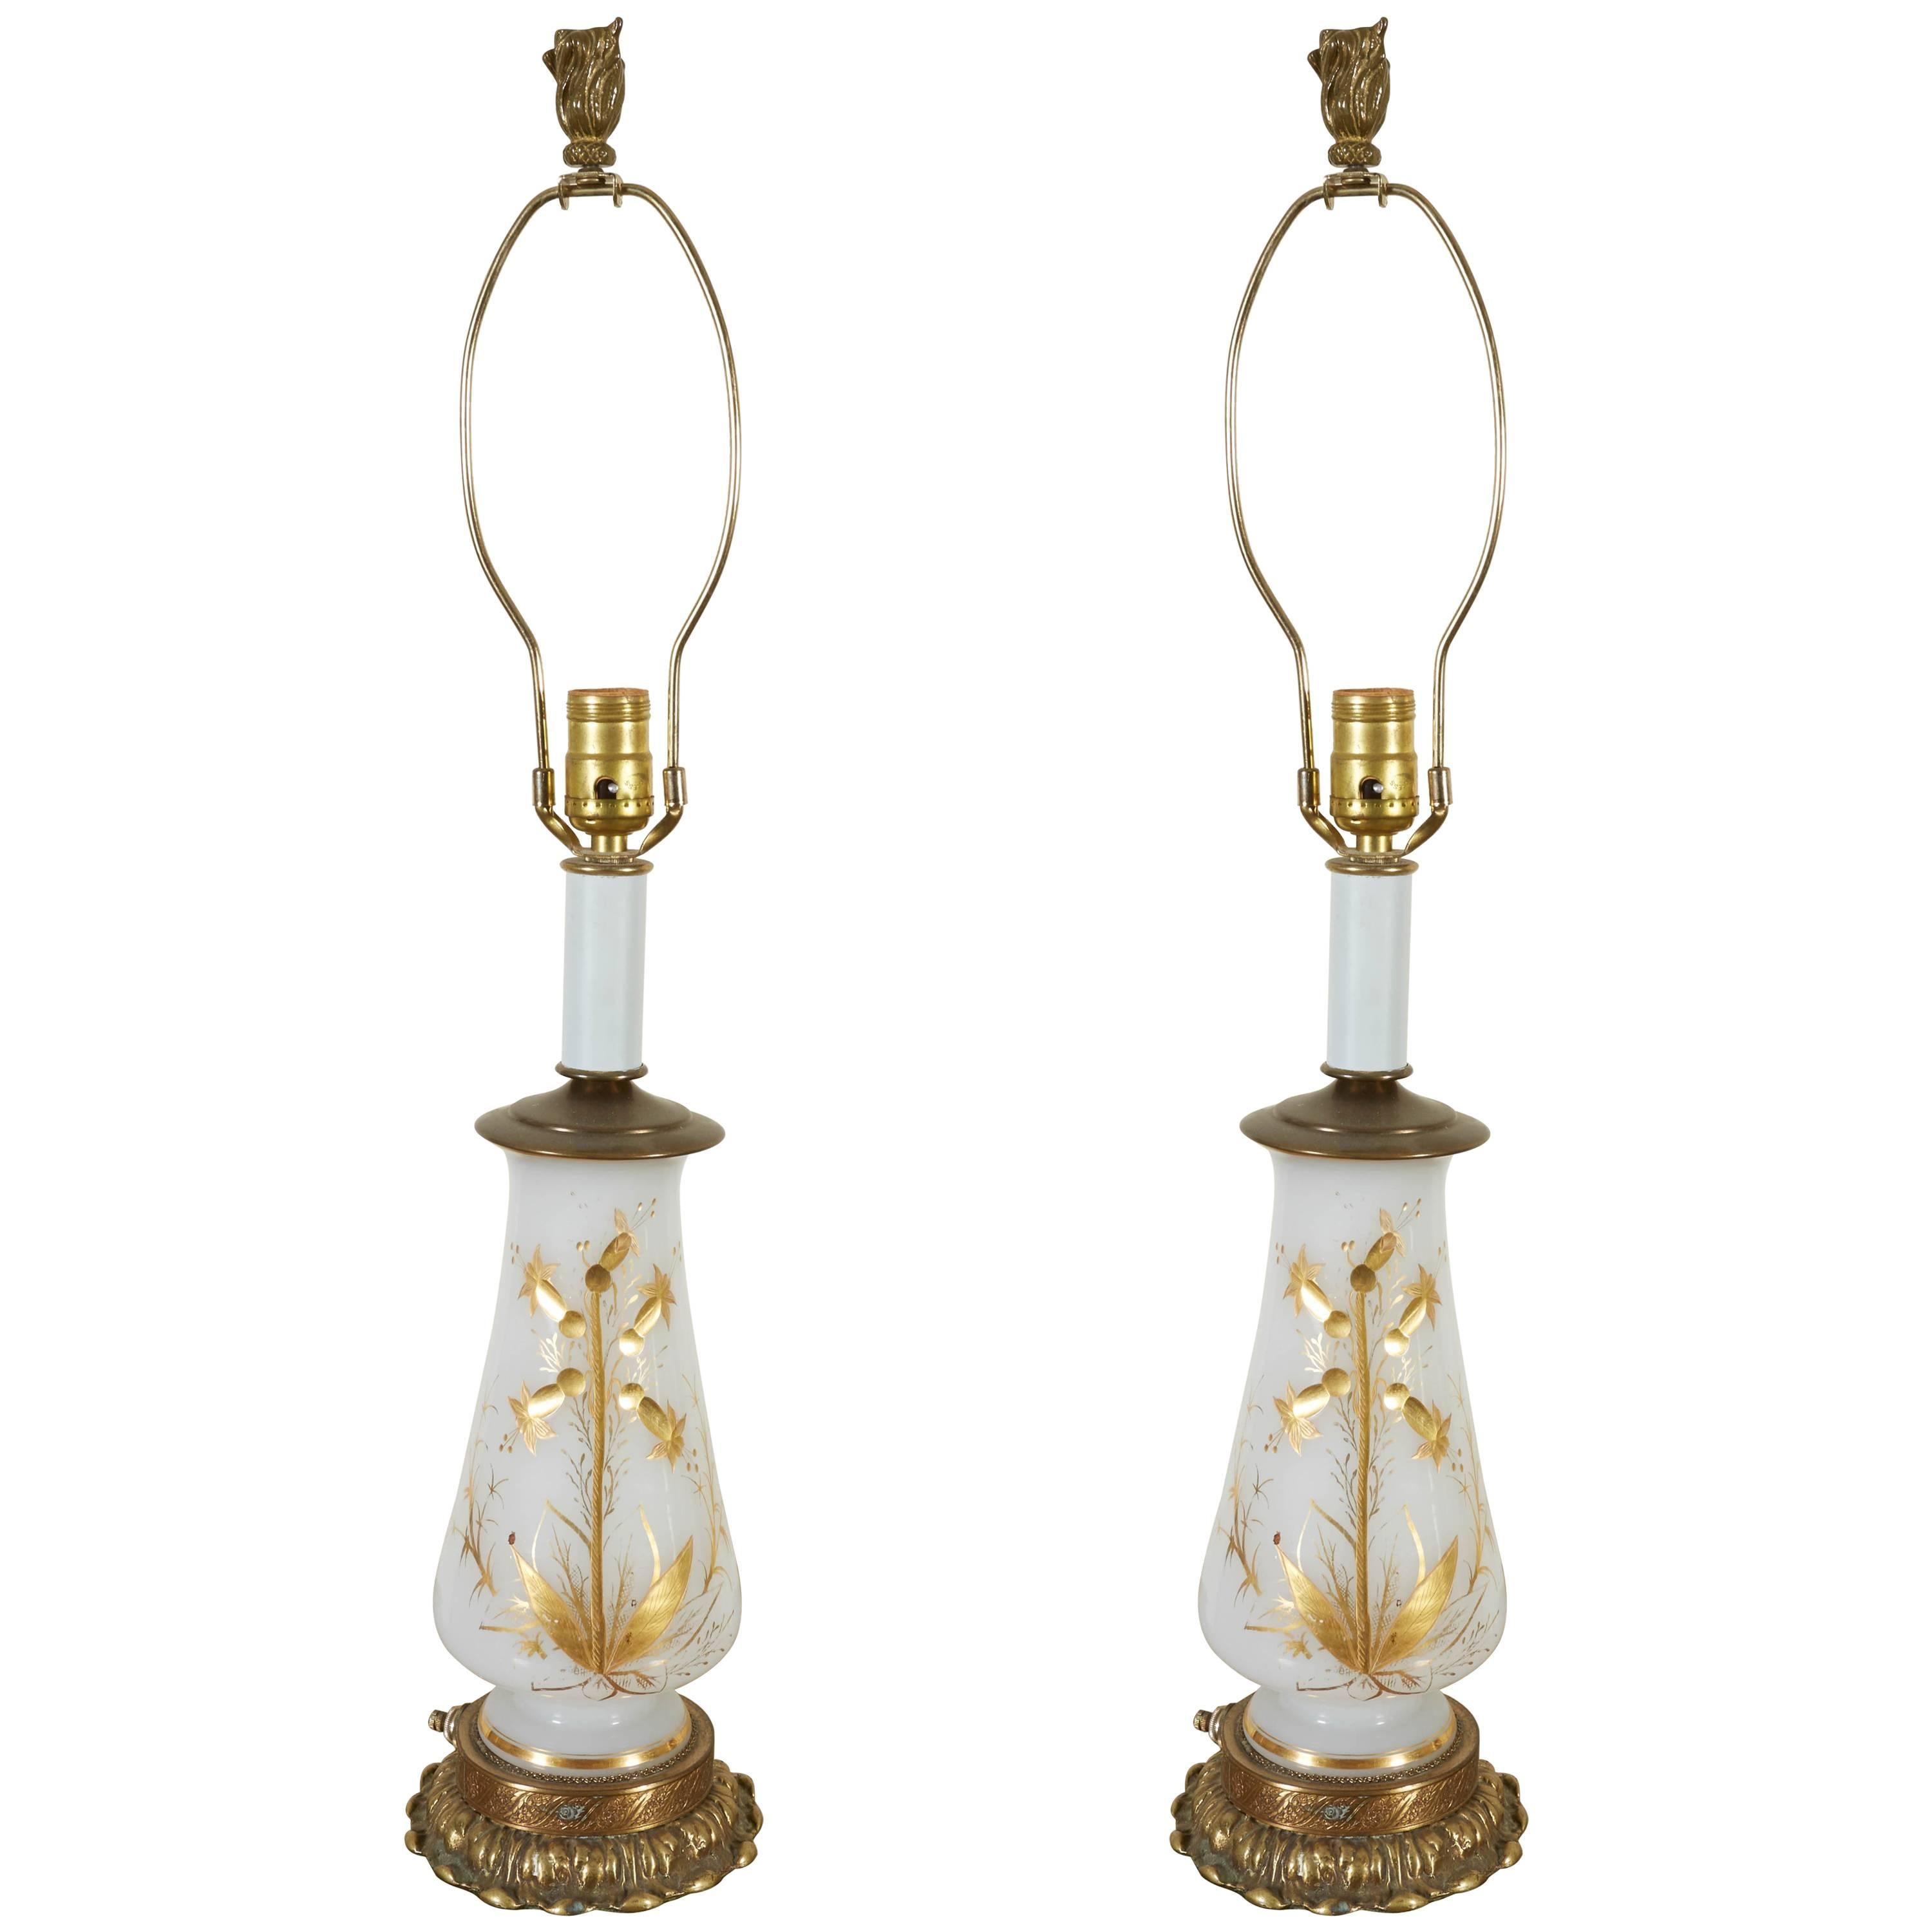 19th Century Pair of Hand-Painted Opaline and Gilt Table Lamps